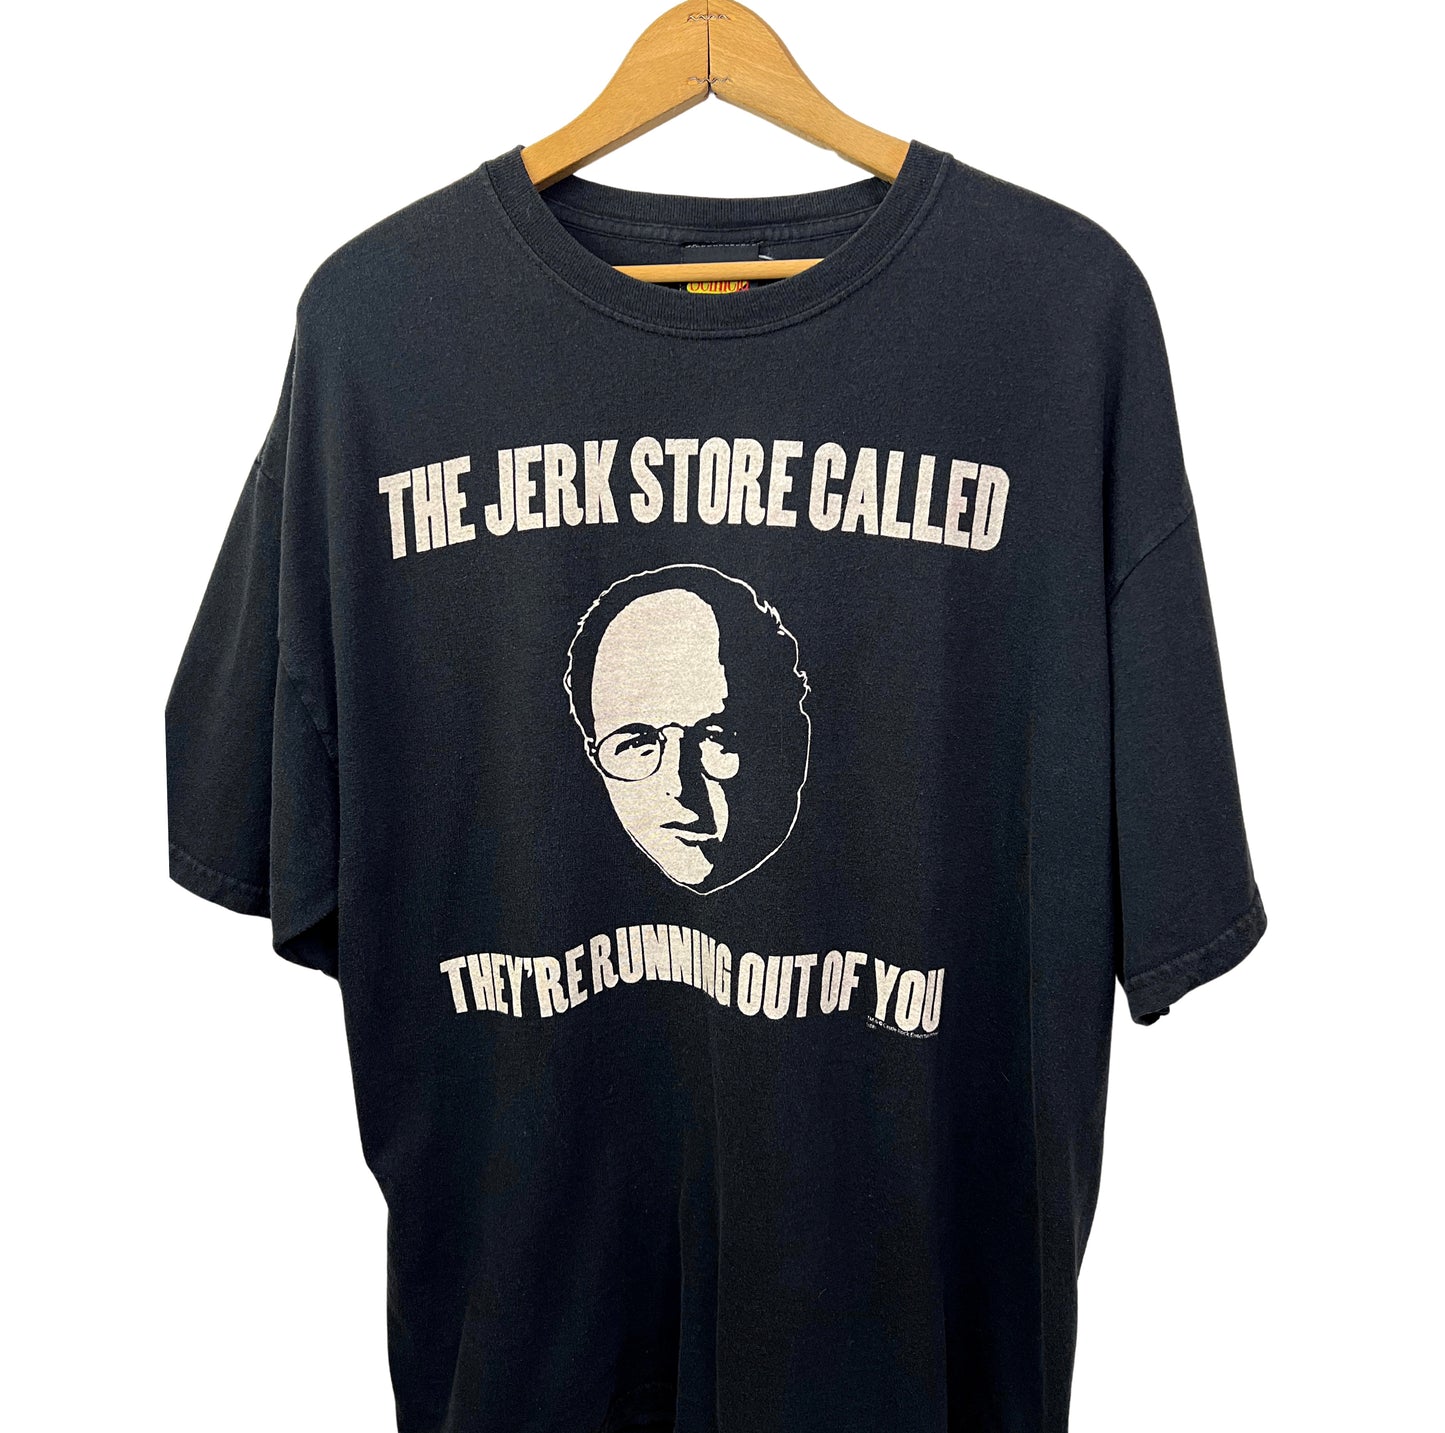 00s Seinfeld The Jerk Store Called George Costanza T-shirt Size XL